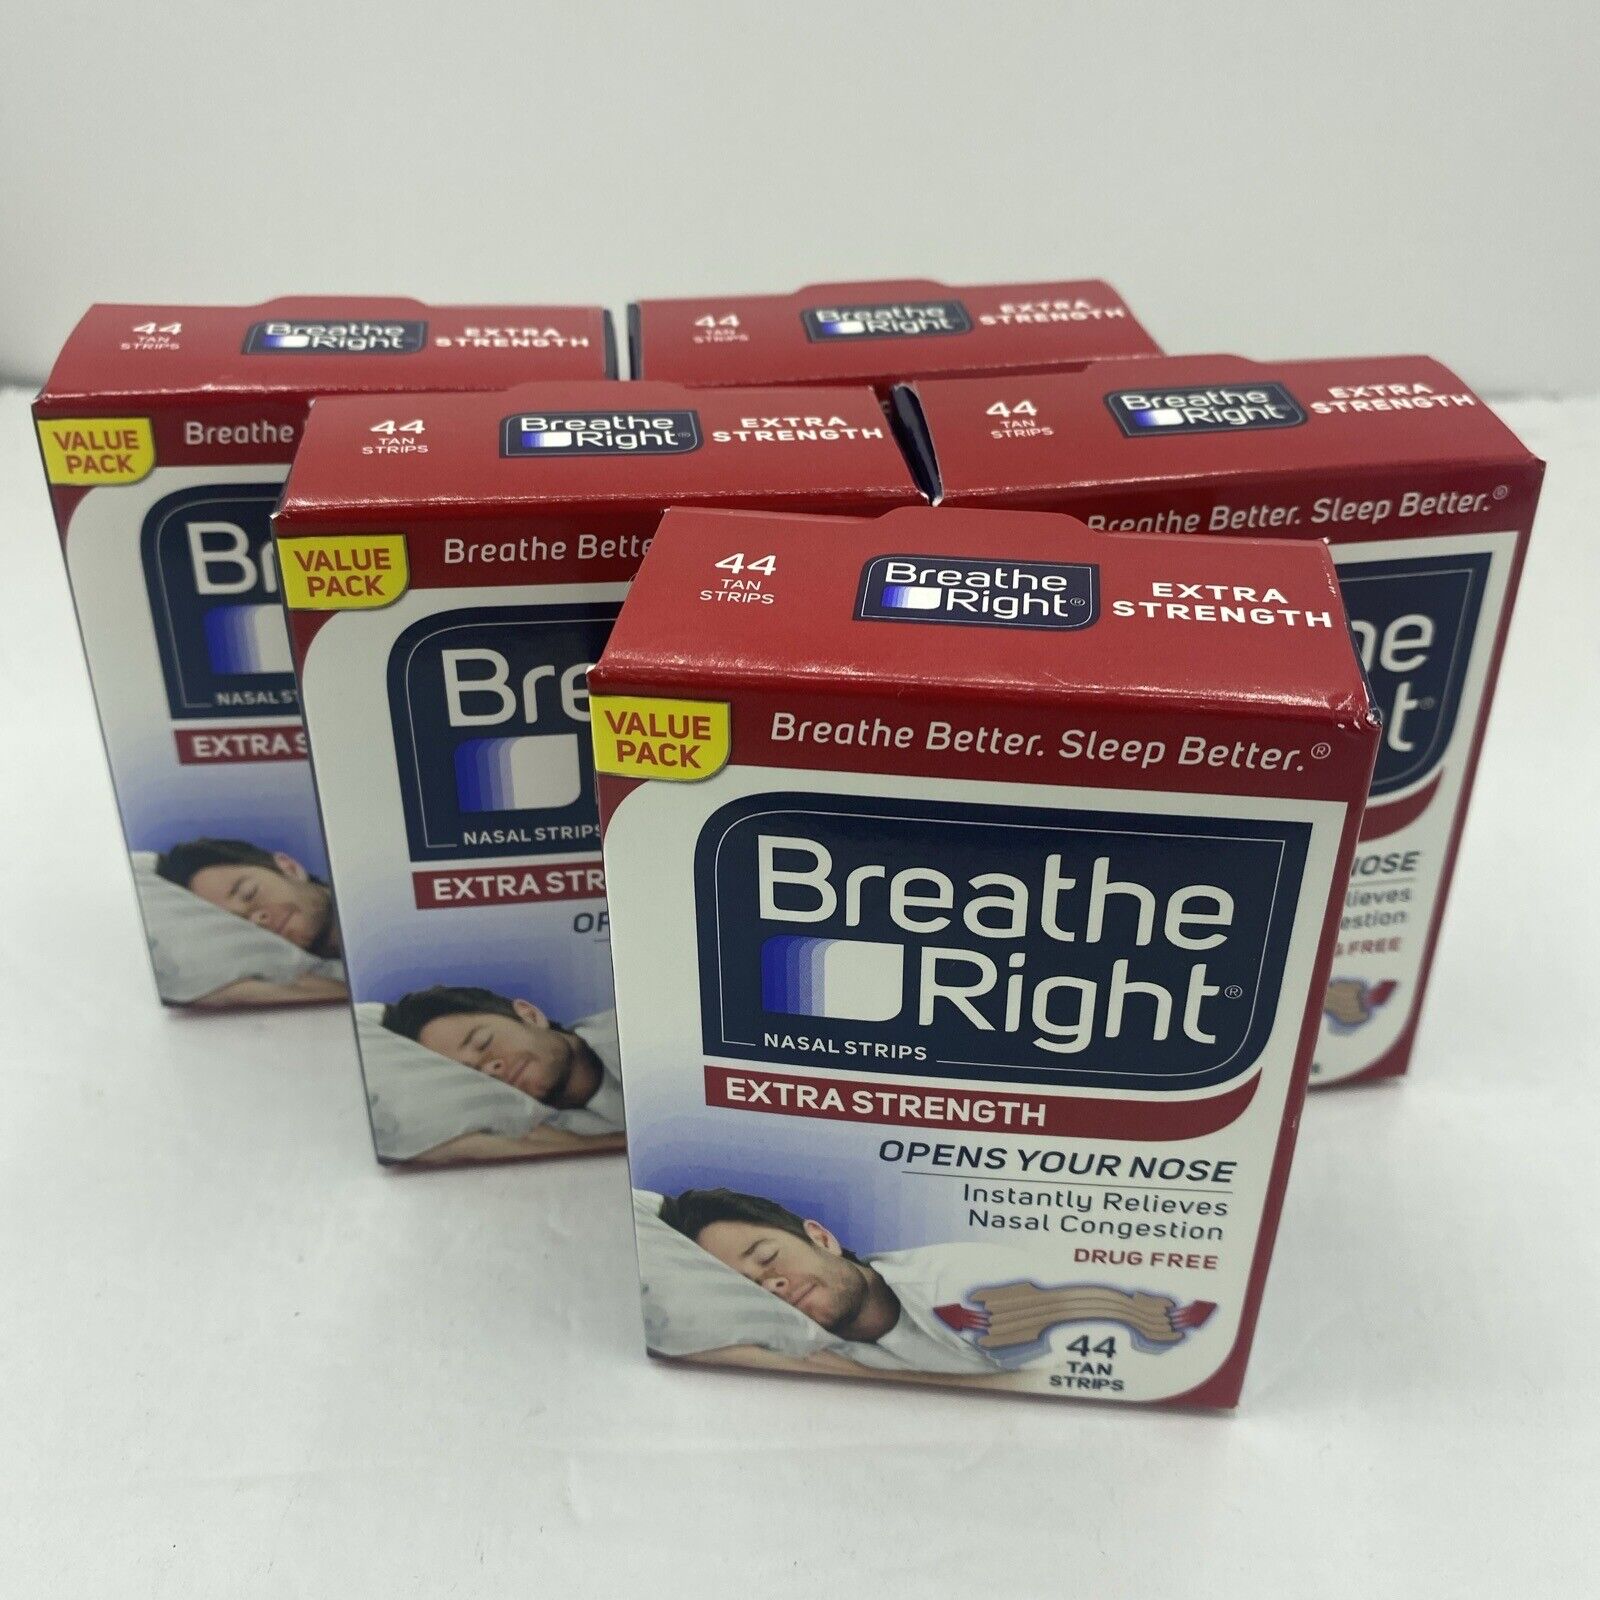 5 Boxes BREATHE RIGHT Nasal Strips EXTRA STRENGTH (44 ea) Tan Strips TOTAL 220